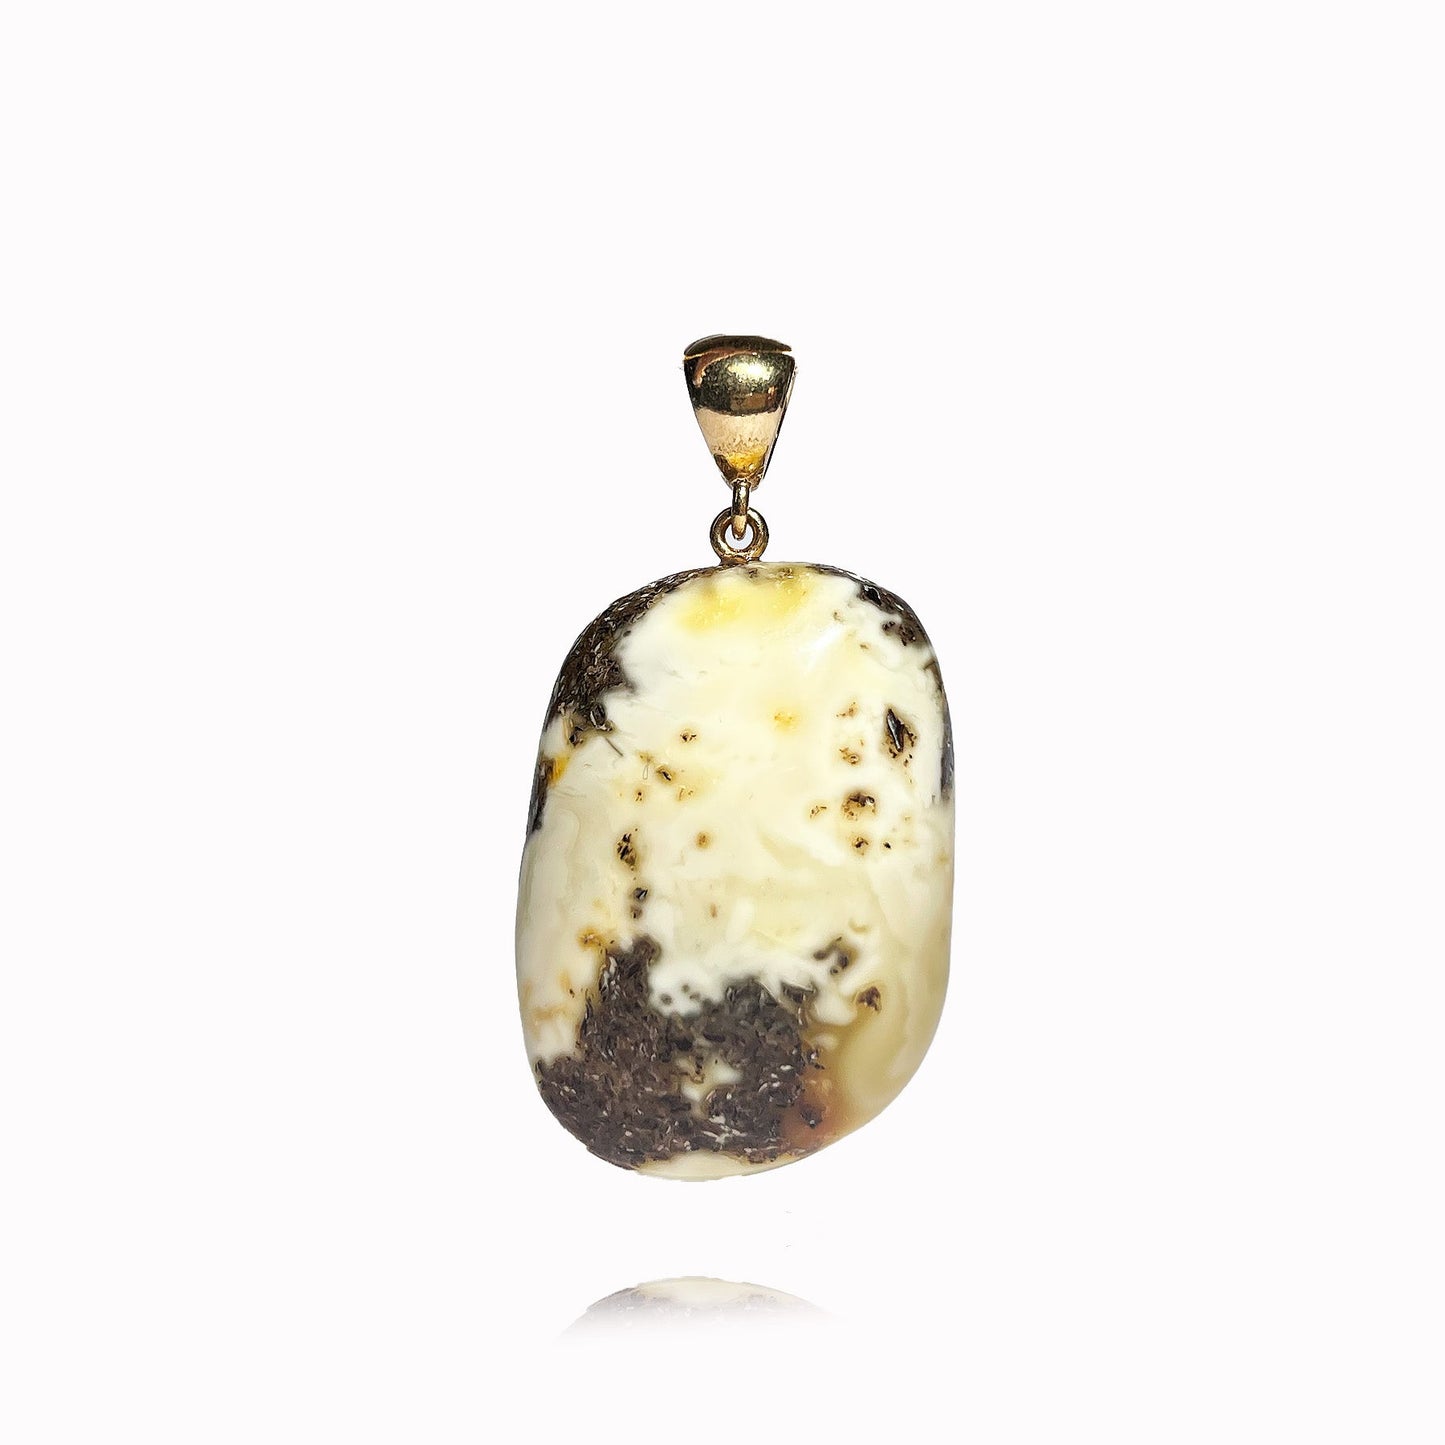 Amber pendant, gilded silver 925 "Vision"